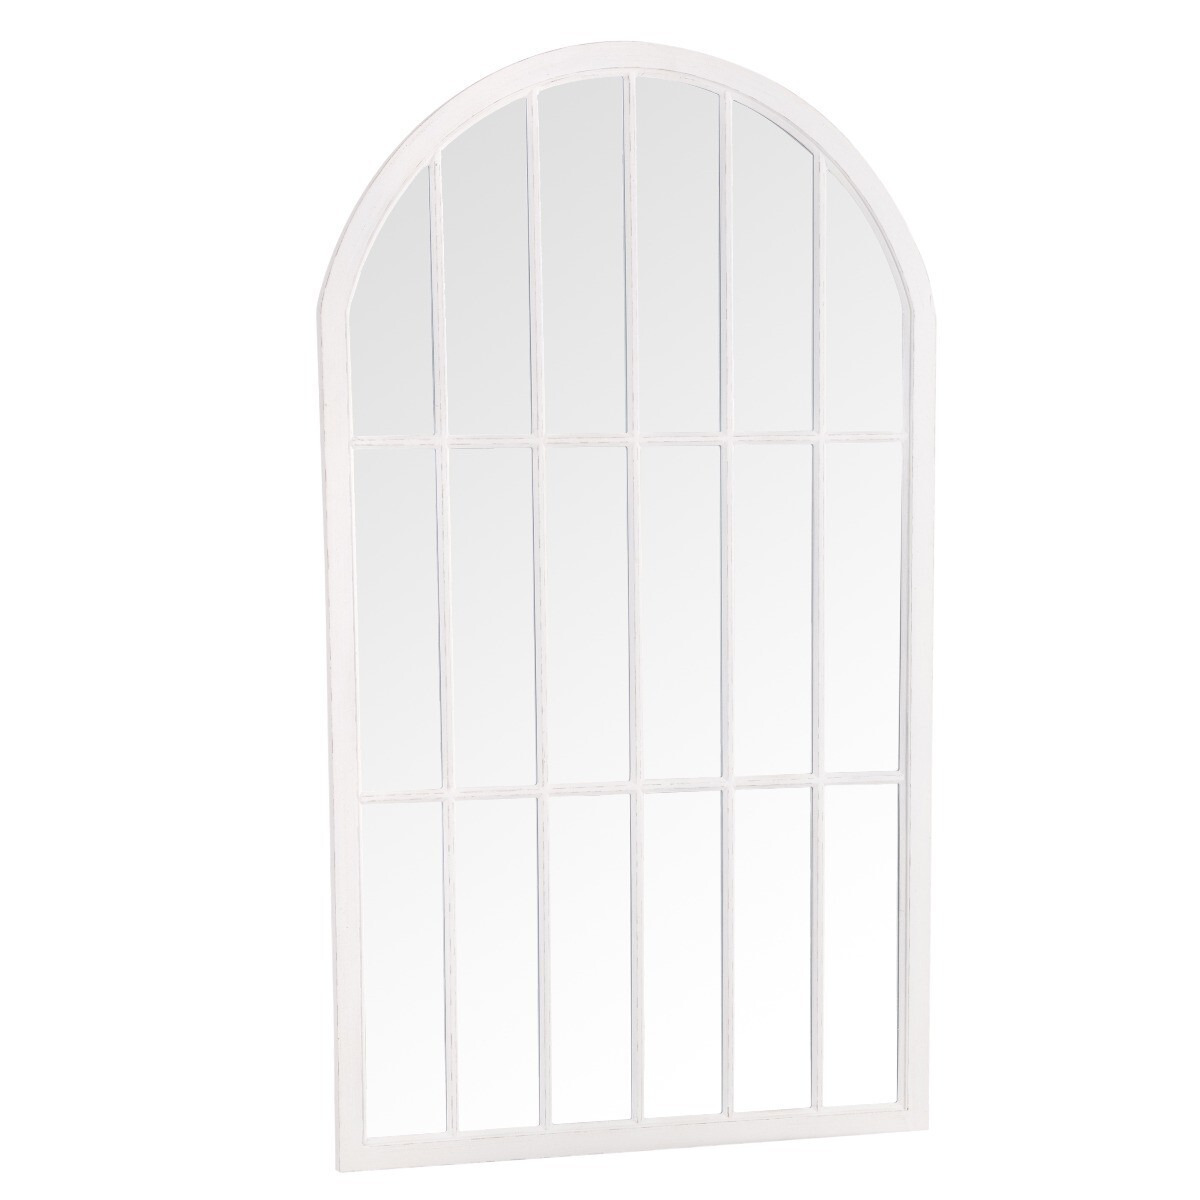 Elsa White Large Arched Window Mirror